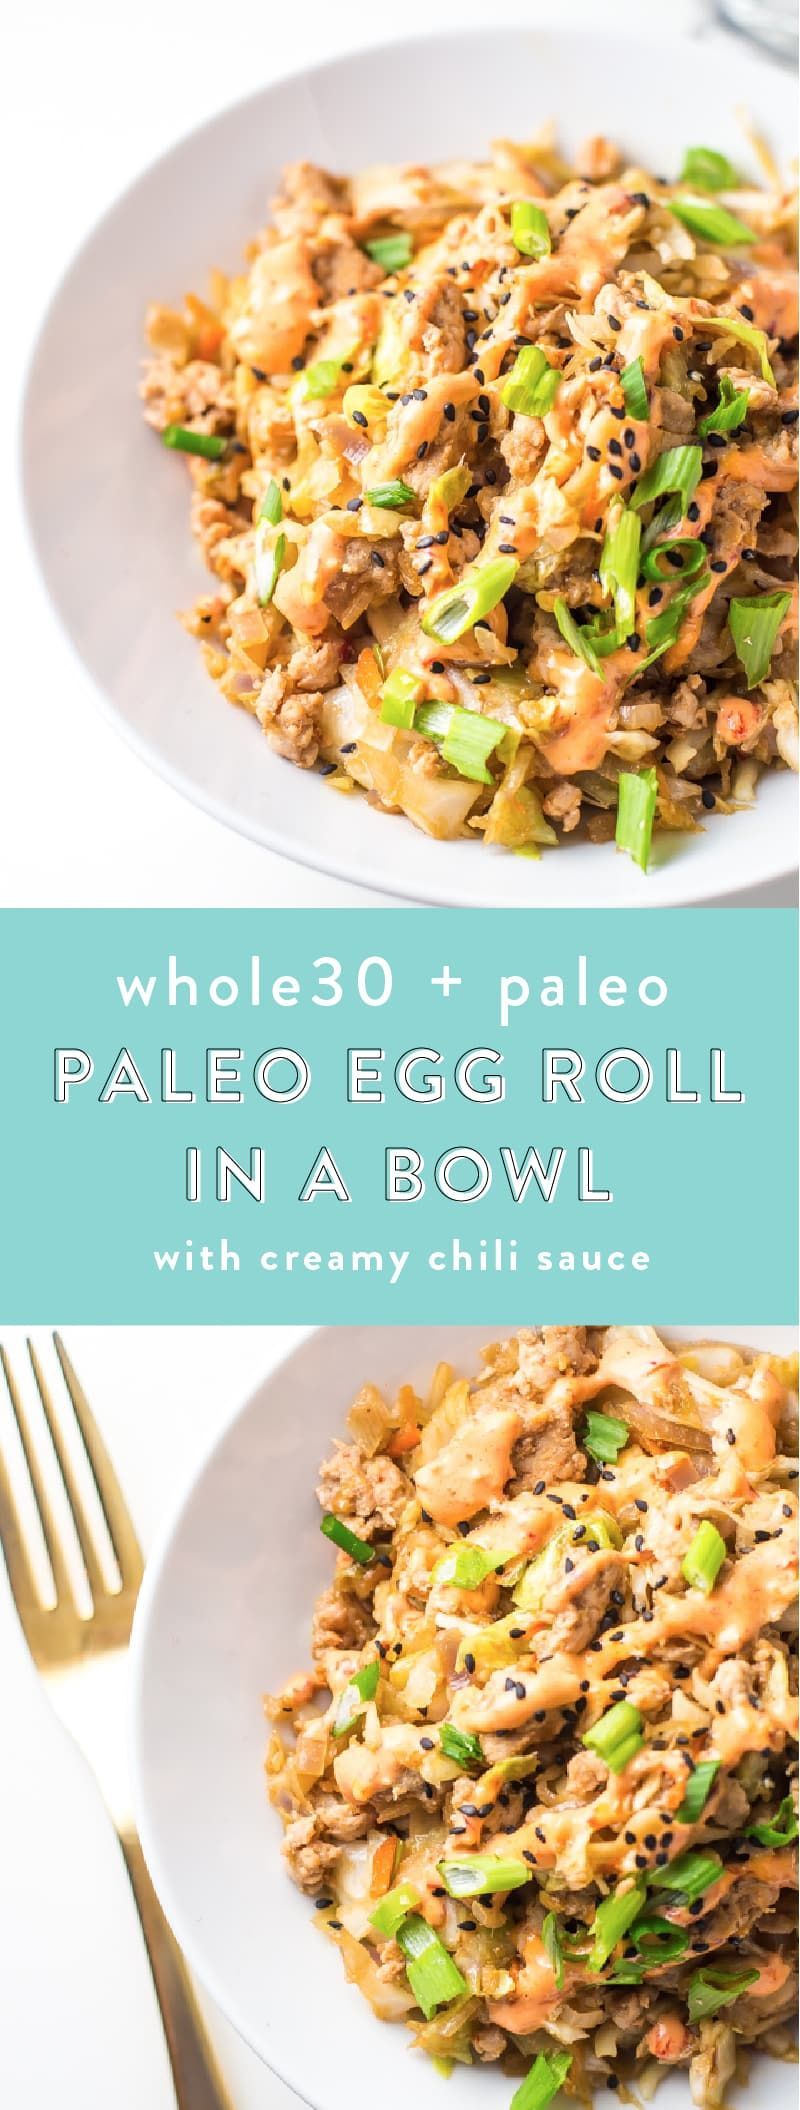 This Whole30 egg roll with creamy chili sauce in a bowl is a wonderfully flavorful, quick Whole30 dinner, packed with protein and